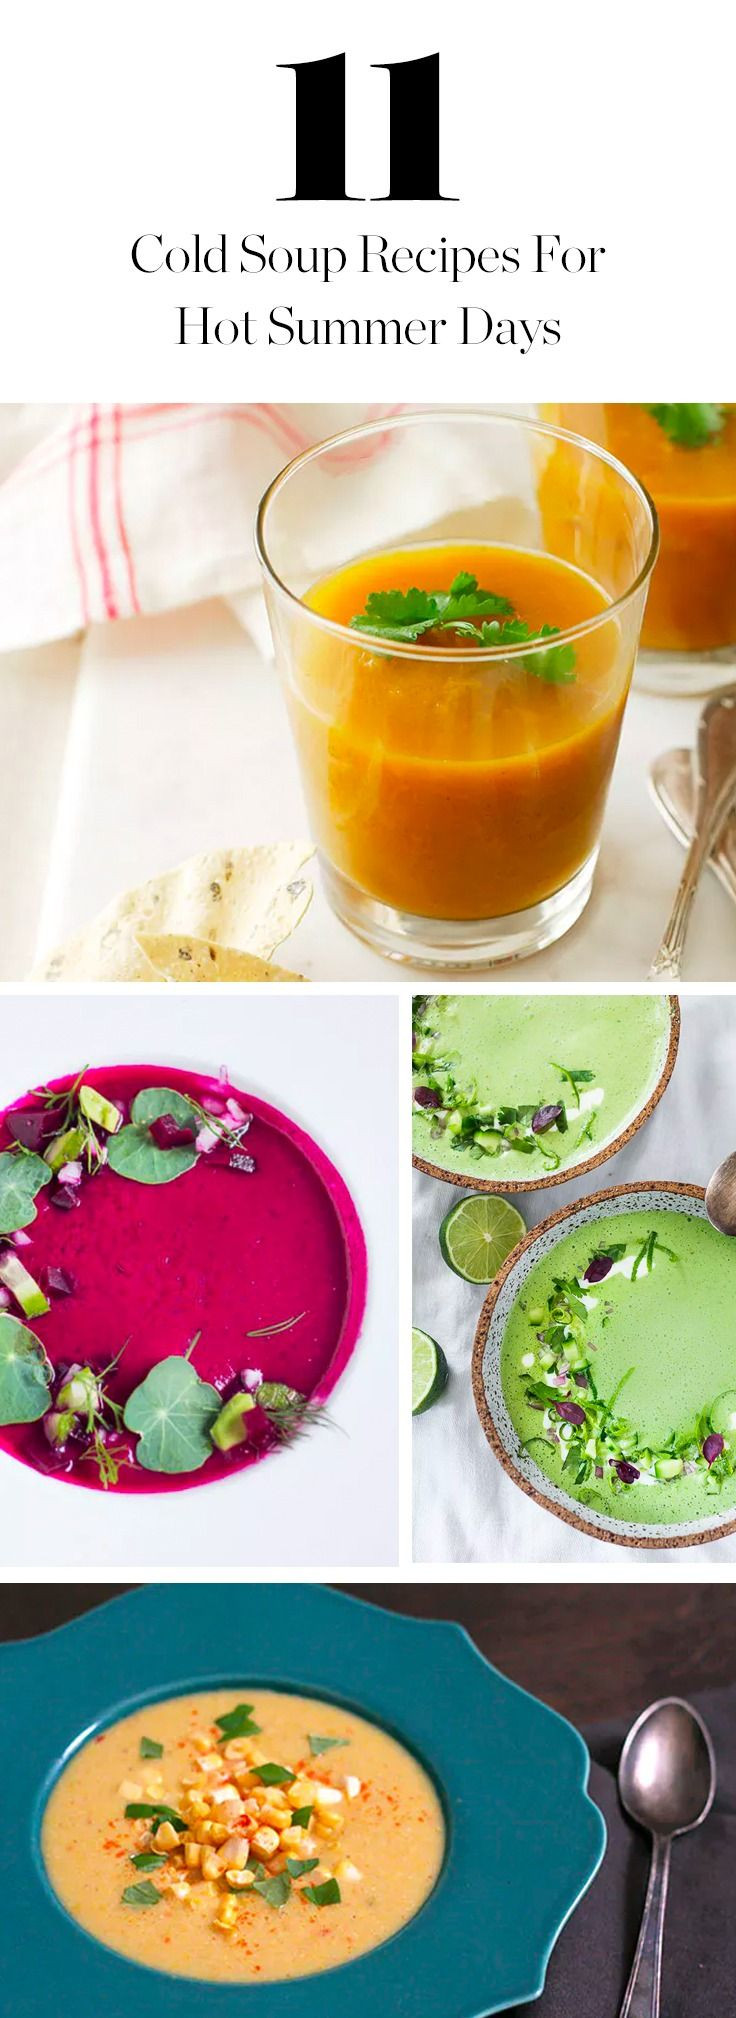 Summer Soups Ideas
 11 Cold Soup Recipes for Hot Summer Days